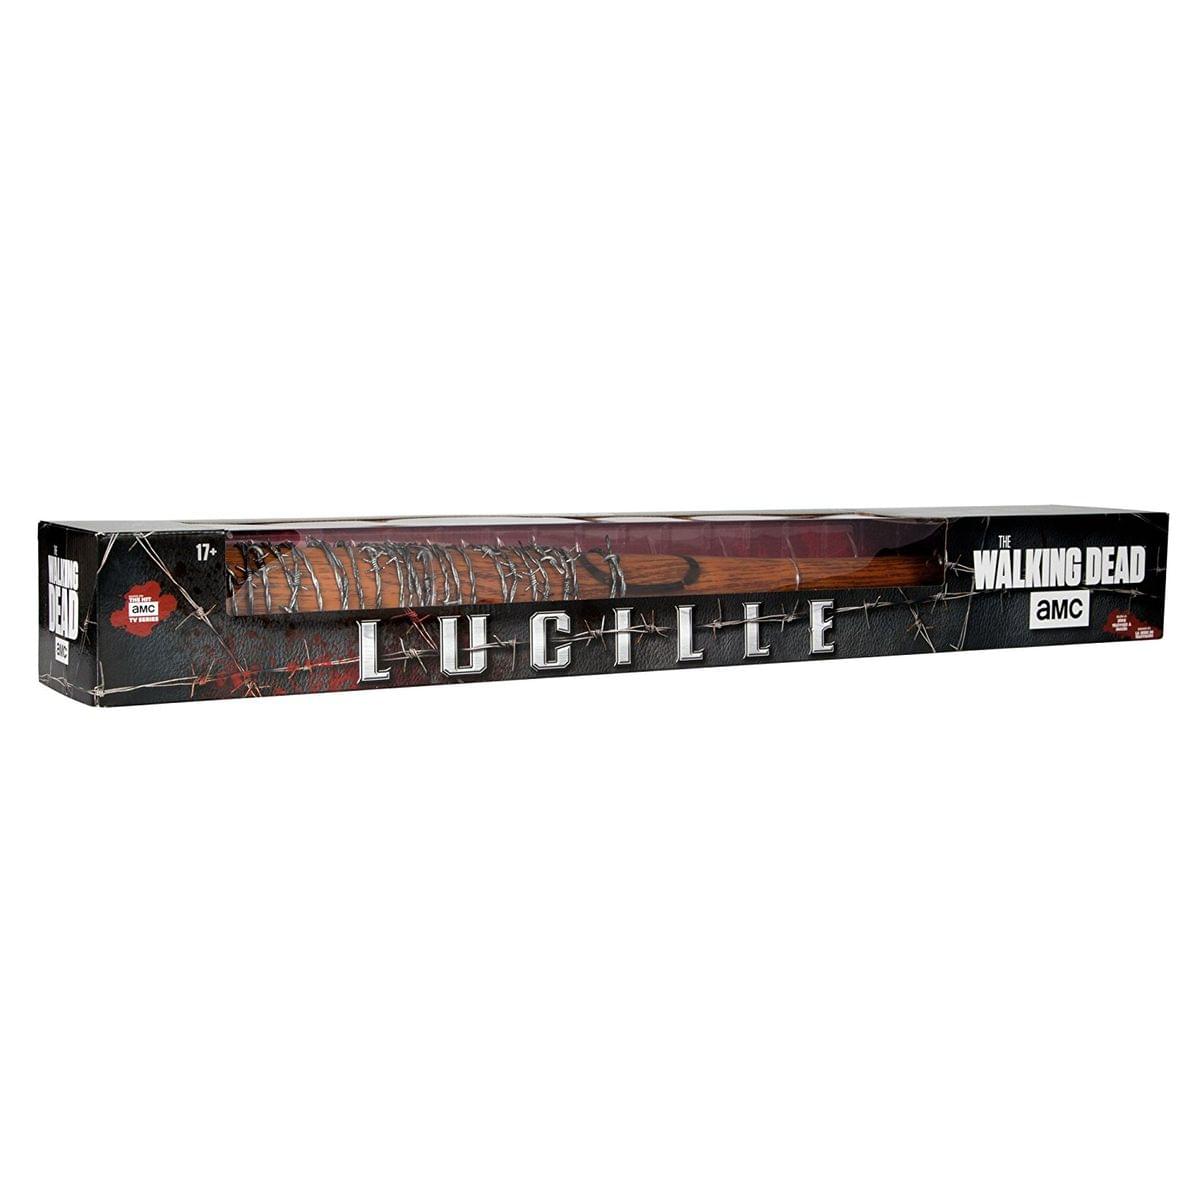 The Walking Dead TV Negan's Bat "Lucille" Role Play Accessory